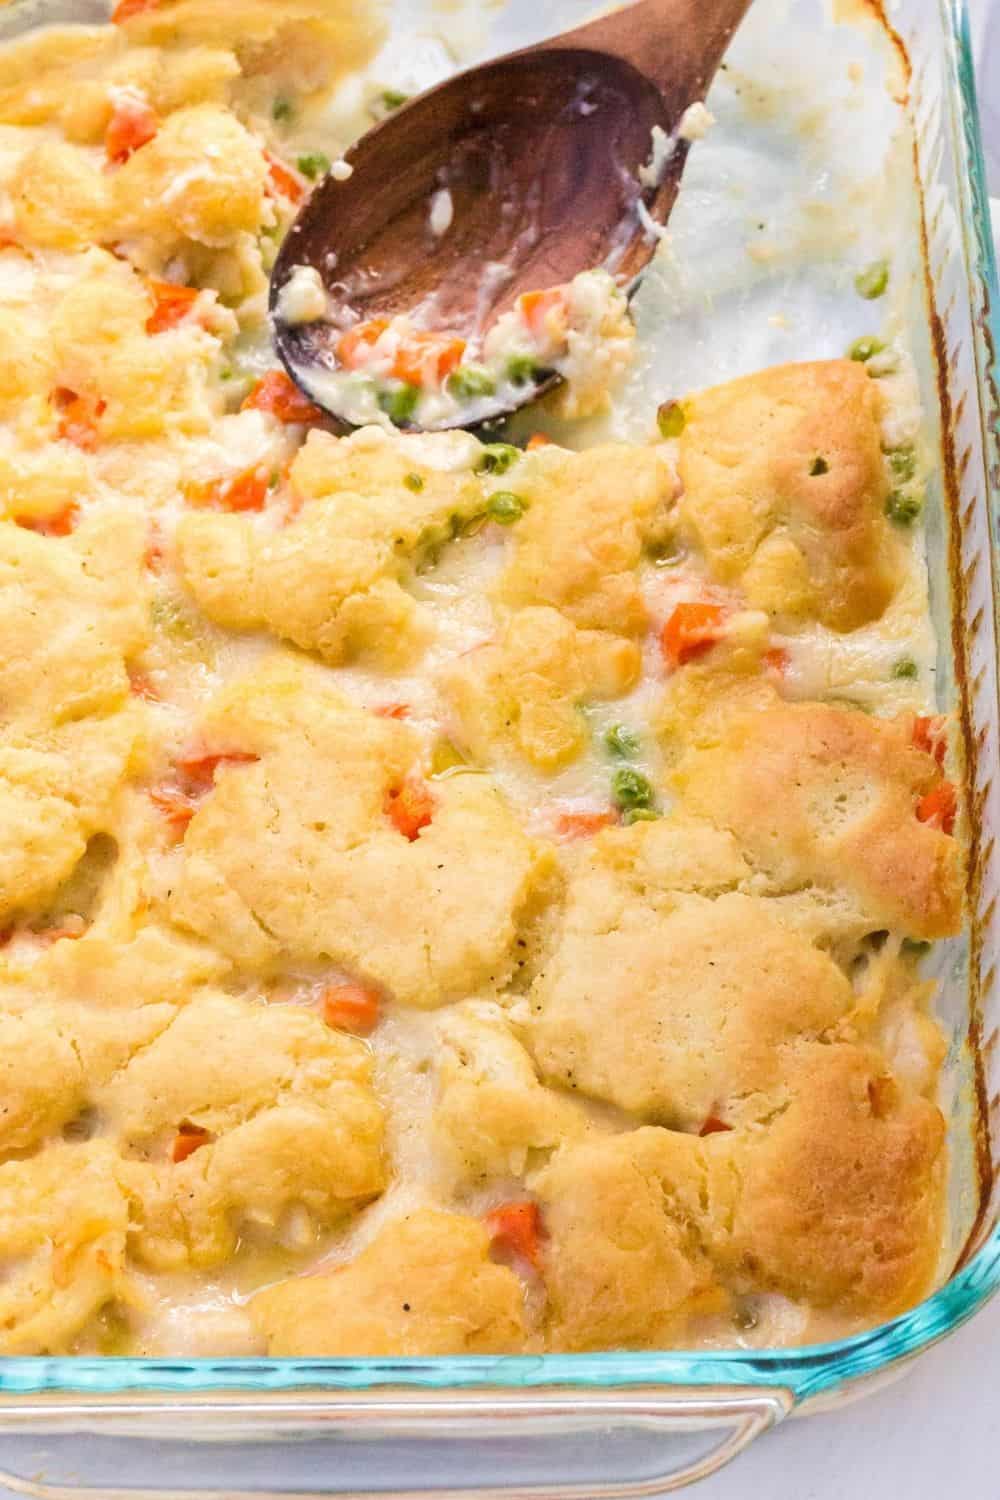 a pan of baked chicken and dumplings casserole, with a wooden serving spoon next to an area where some of the casserole has been scooped out